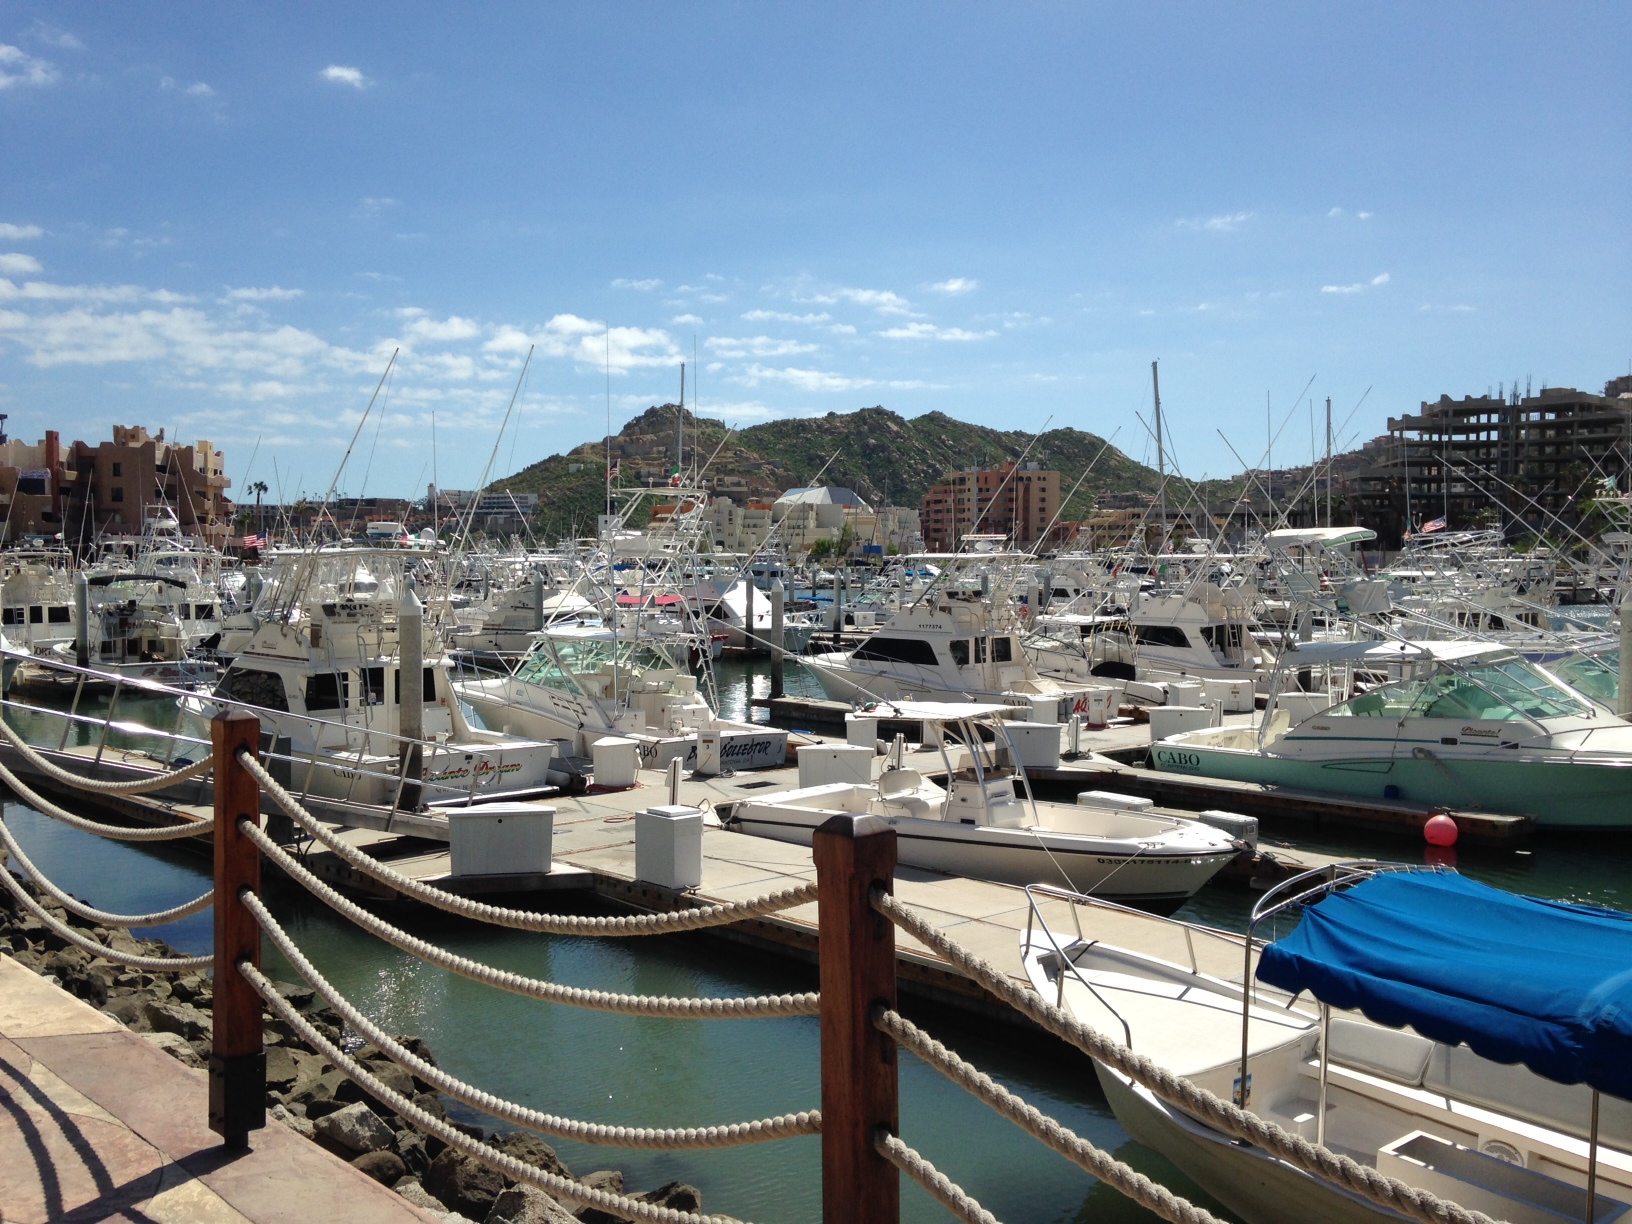 Cabo marina after the clean-up